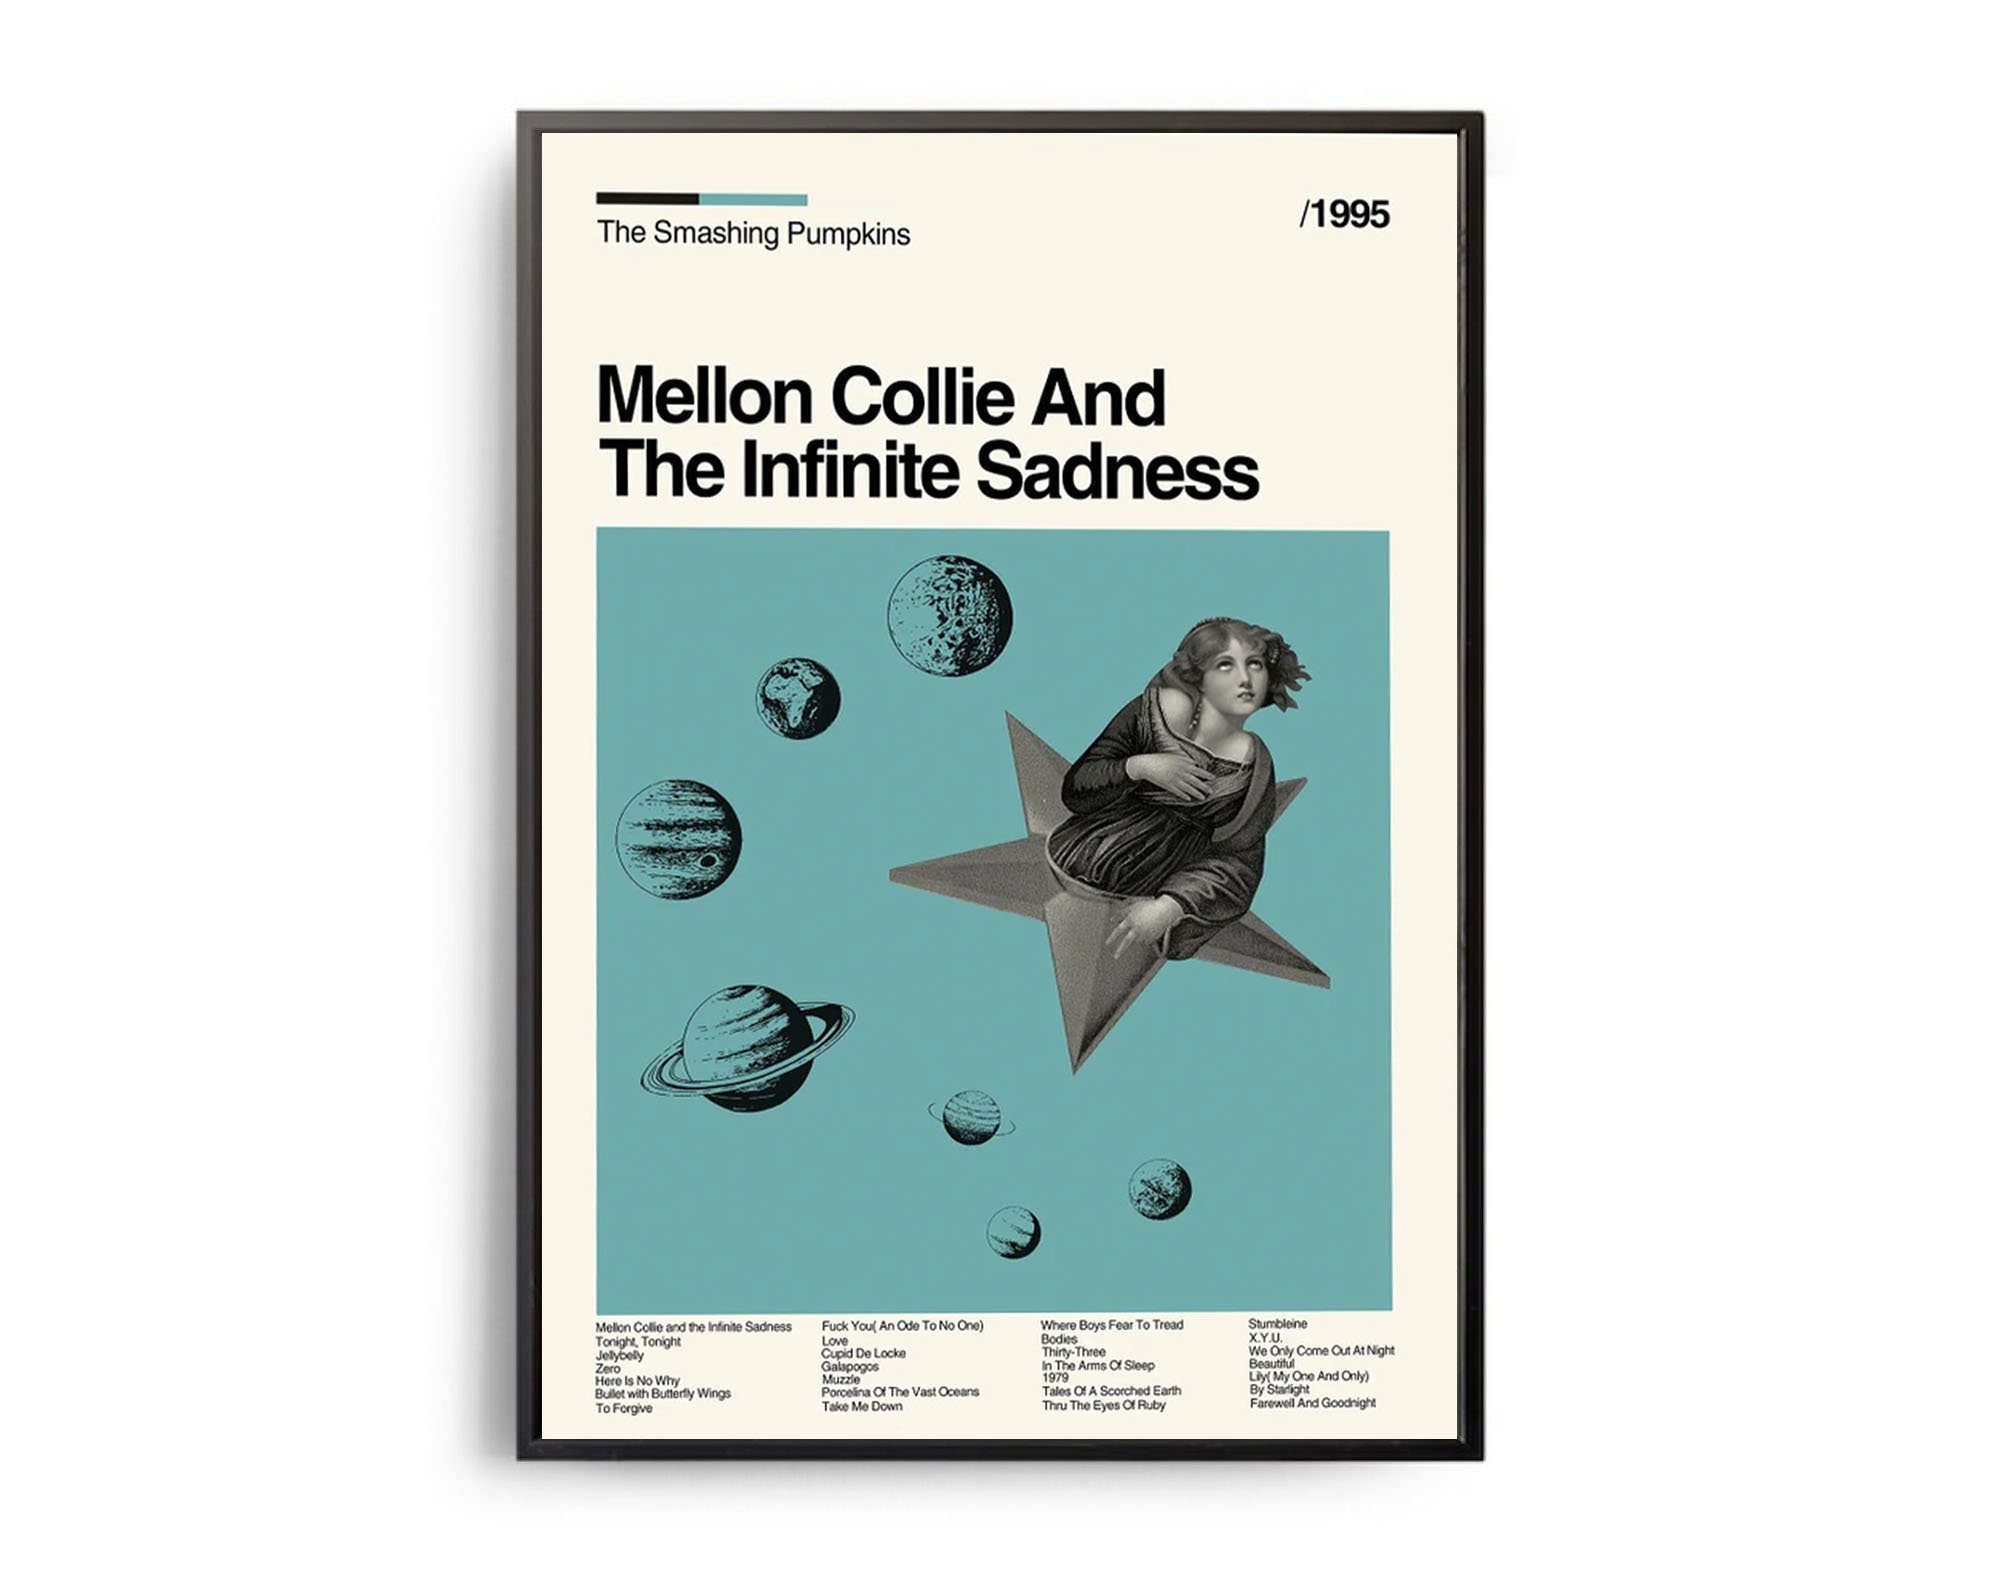 Discover The Smashing Pumpkins Mellon Collie and the Infinite Sadness Poster